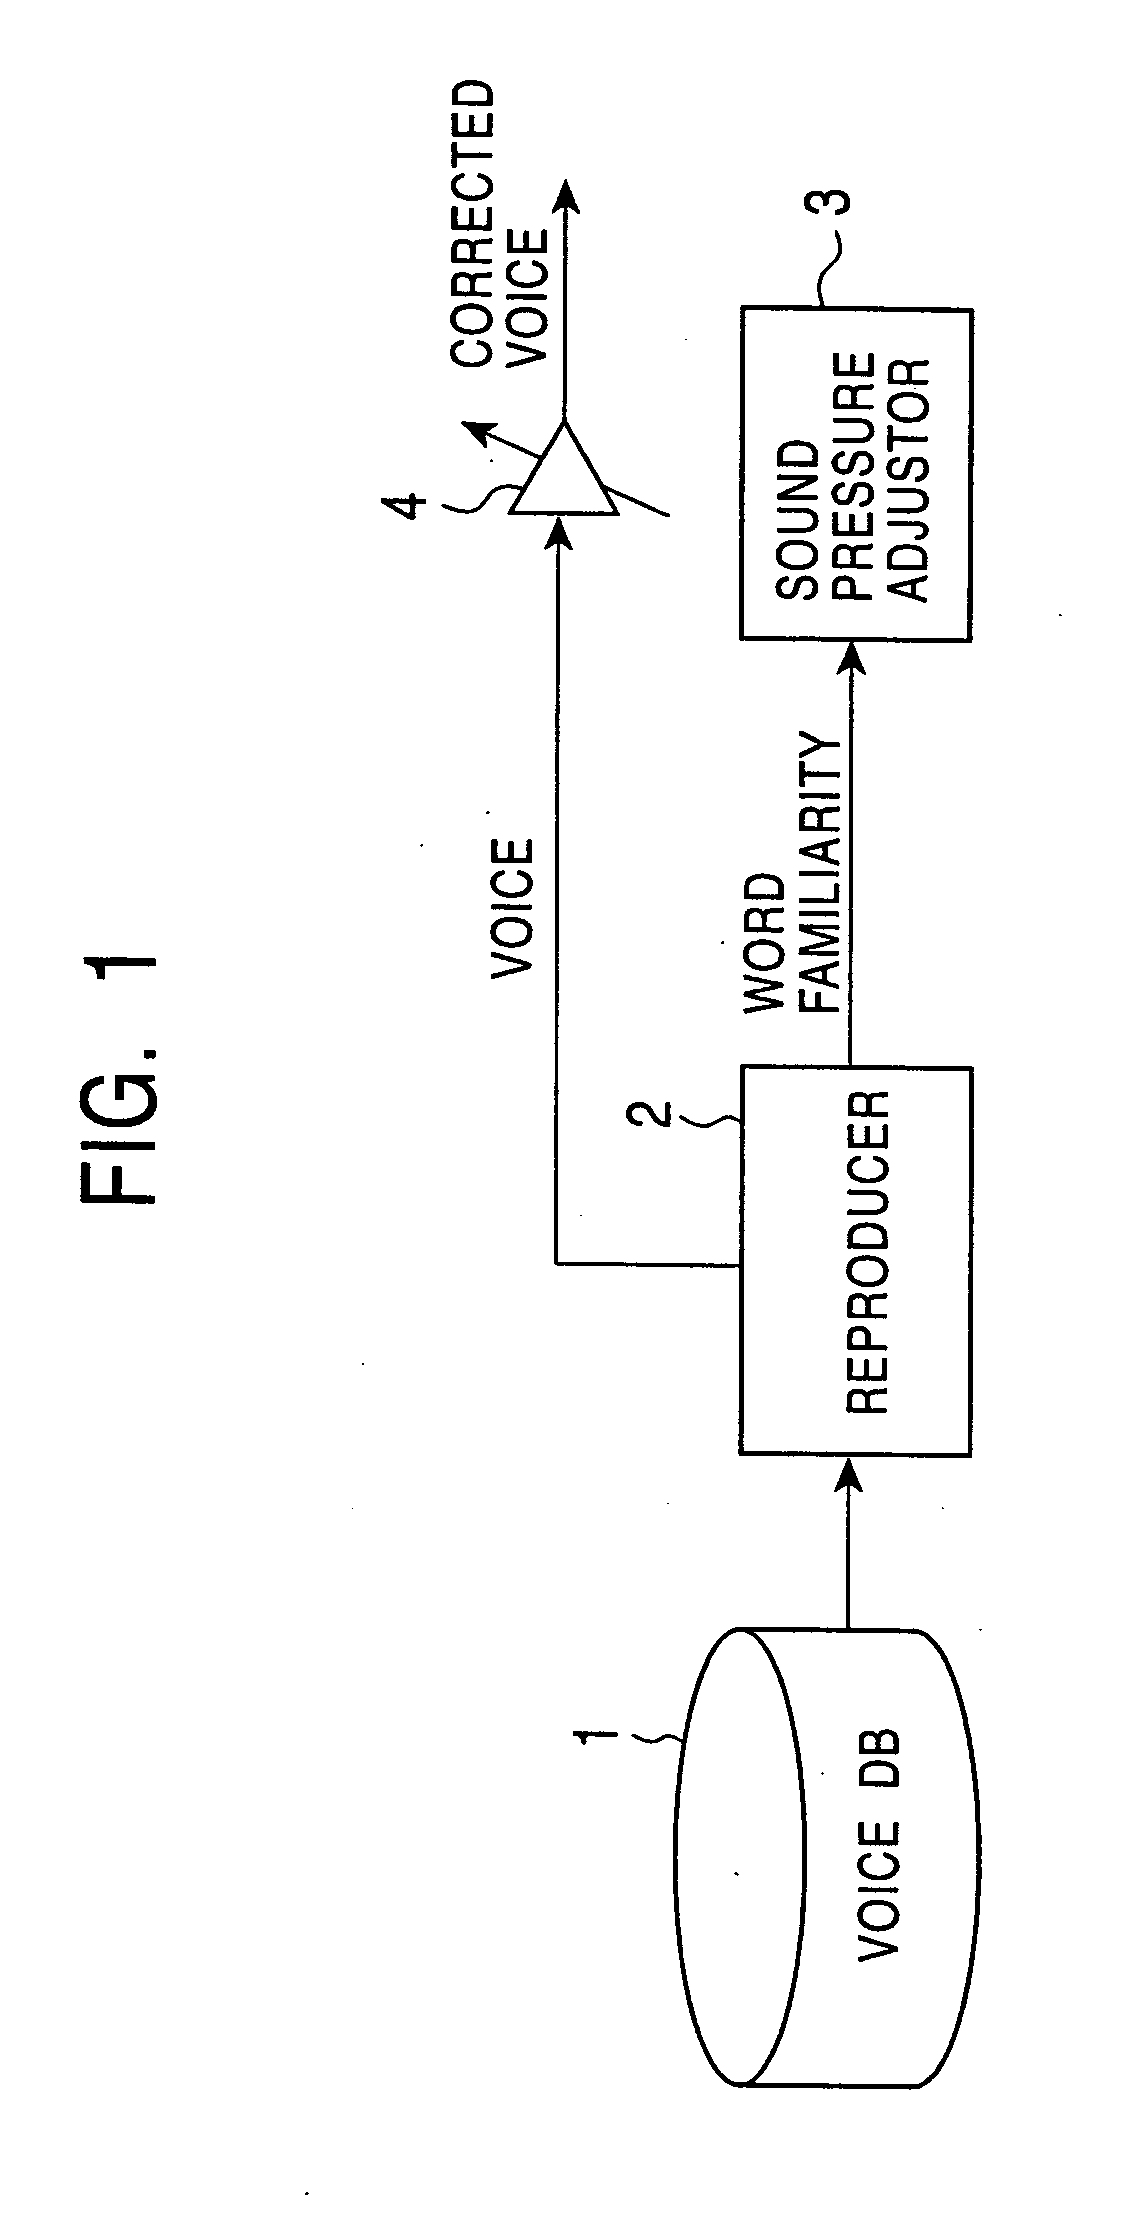 Voice output device and method